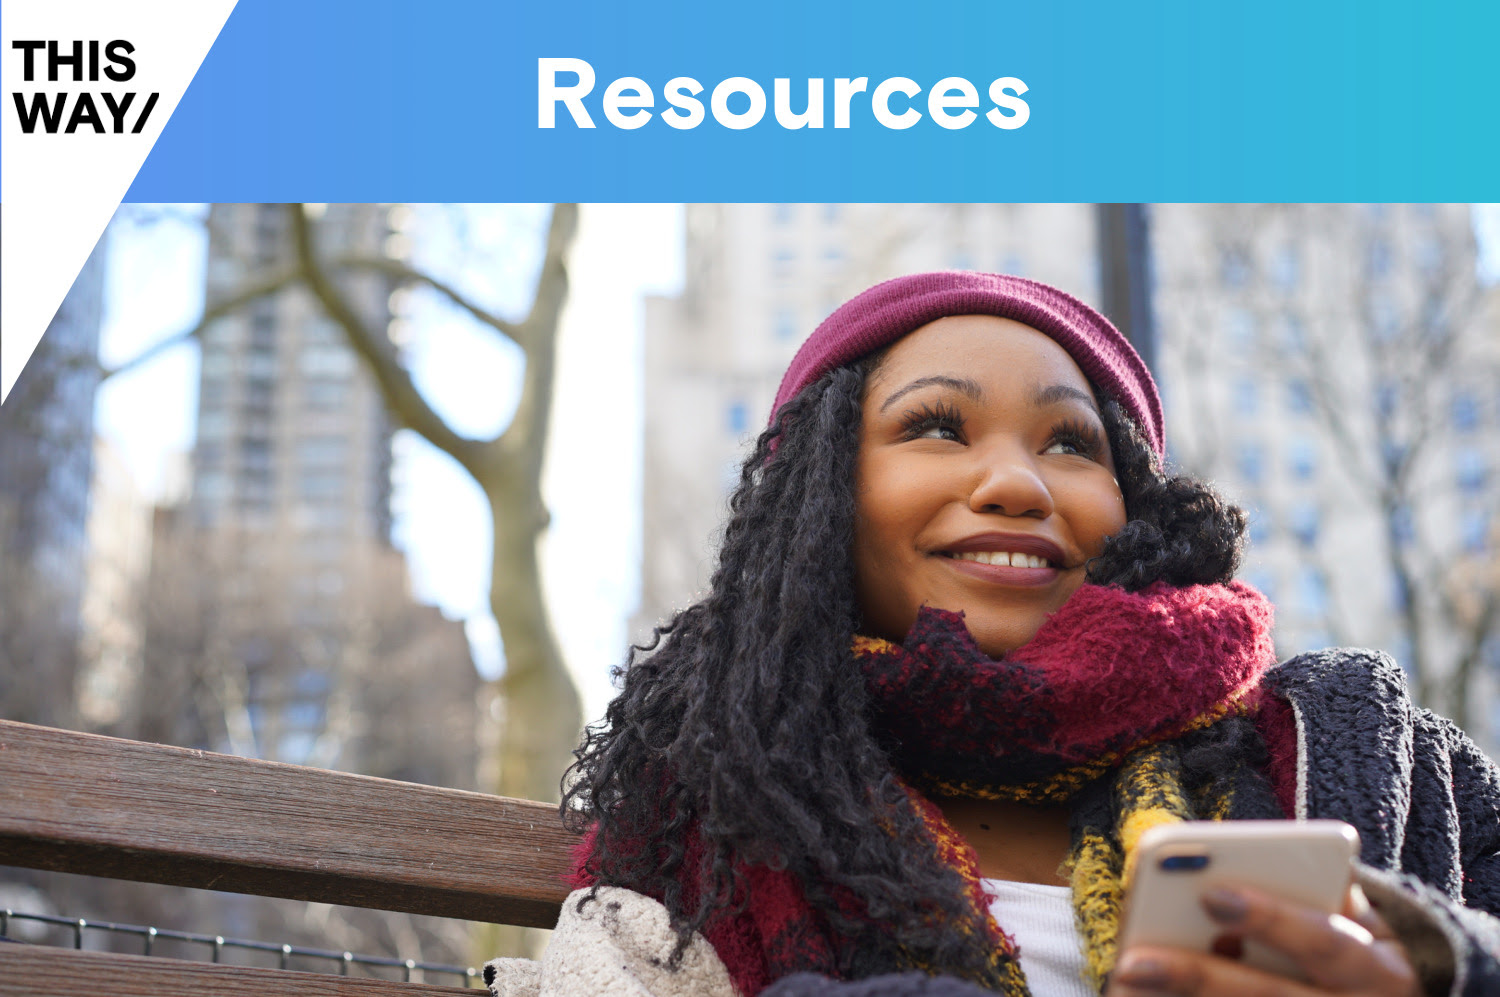 Purple/blue gradient graphic with the word "Resources" at the top + an image of a young person sitting on a bench in the park while using their phone + "THIS WAY/" branded cornerstone in the top left corner.